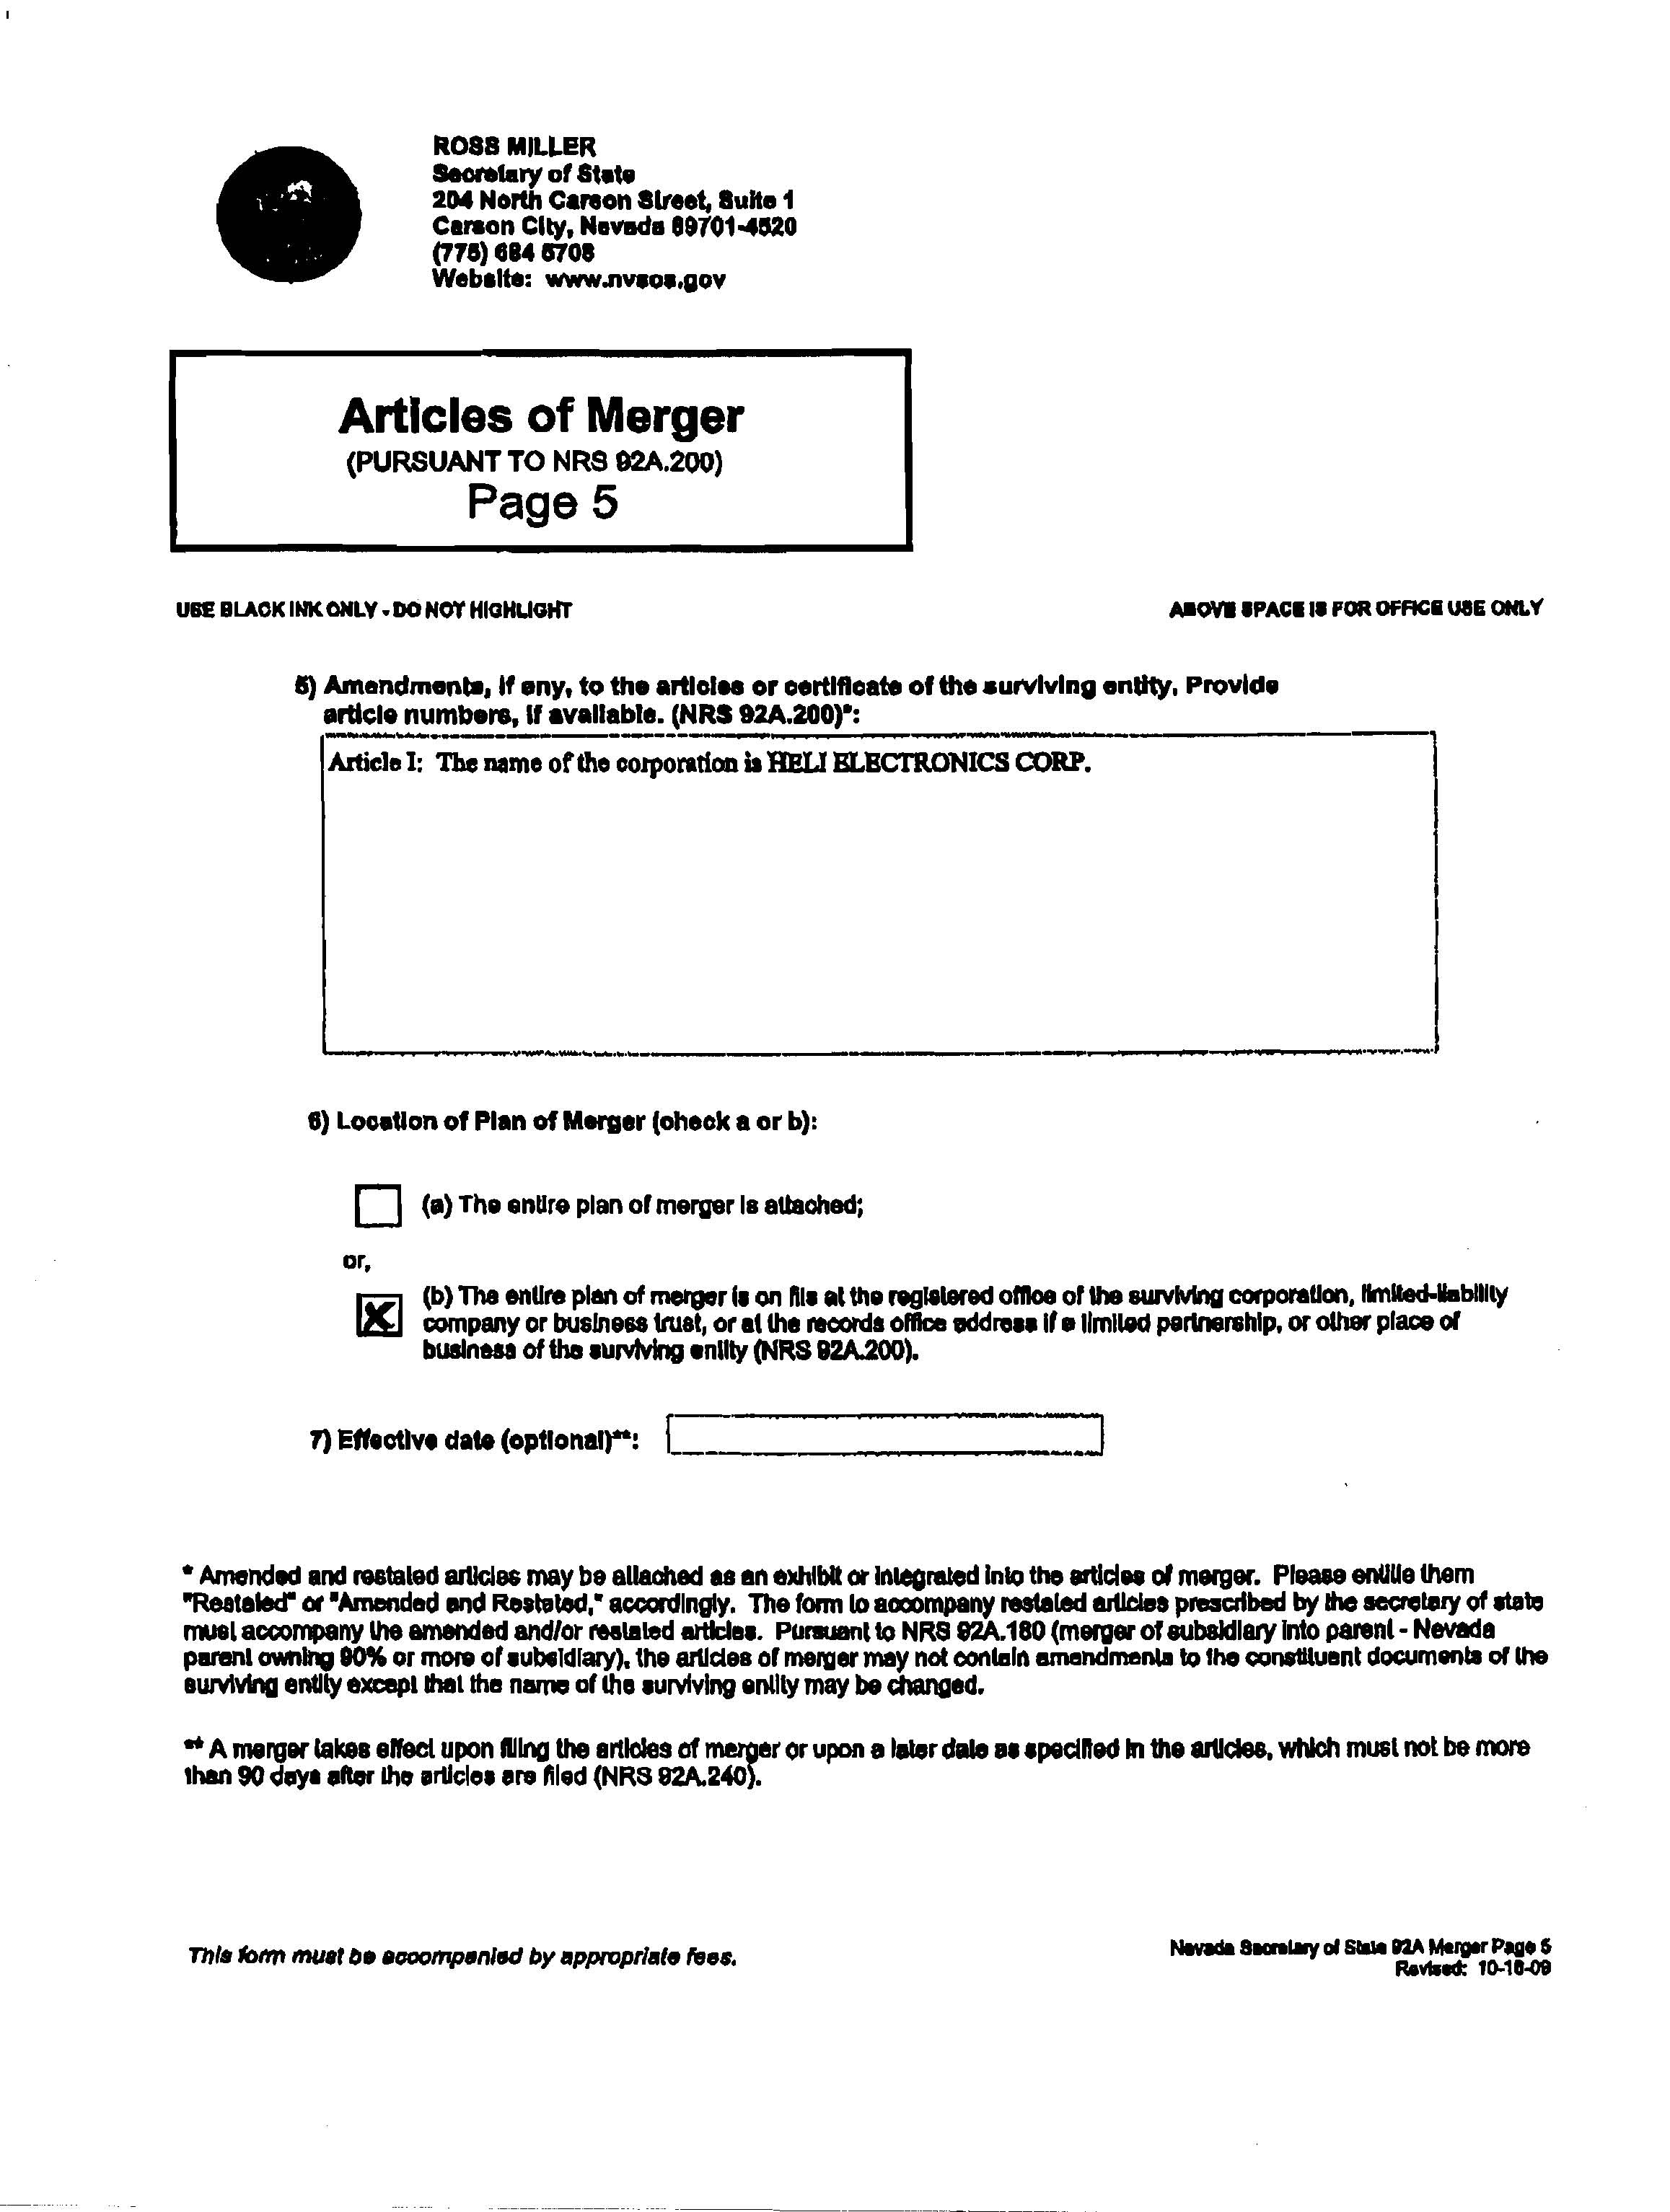 Articles of Merger - Page 5.